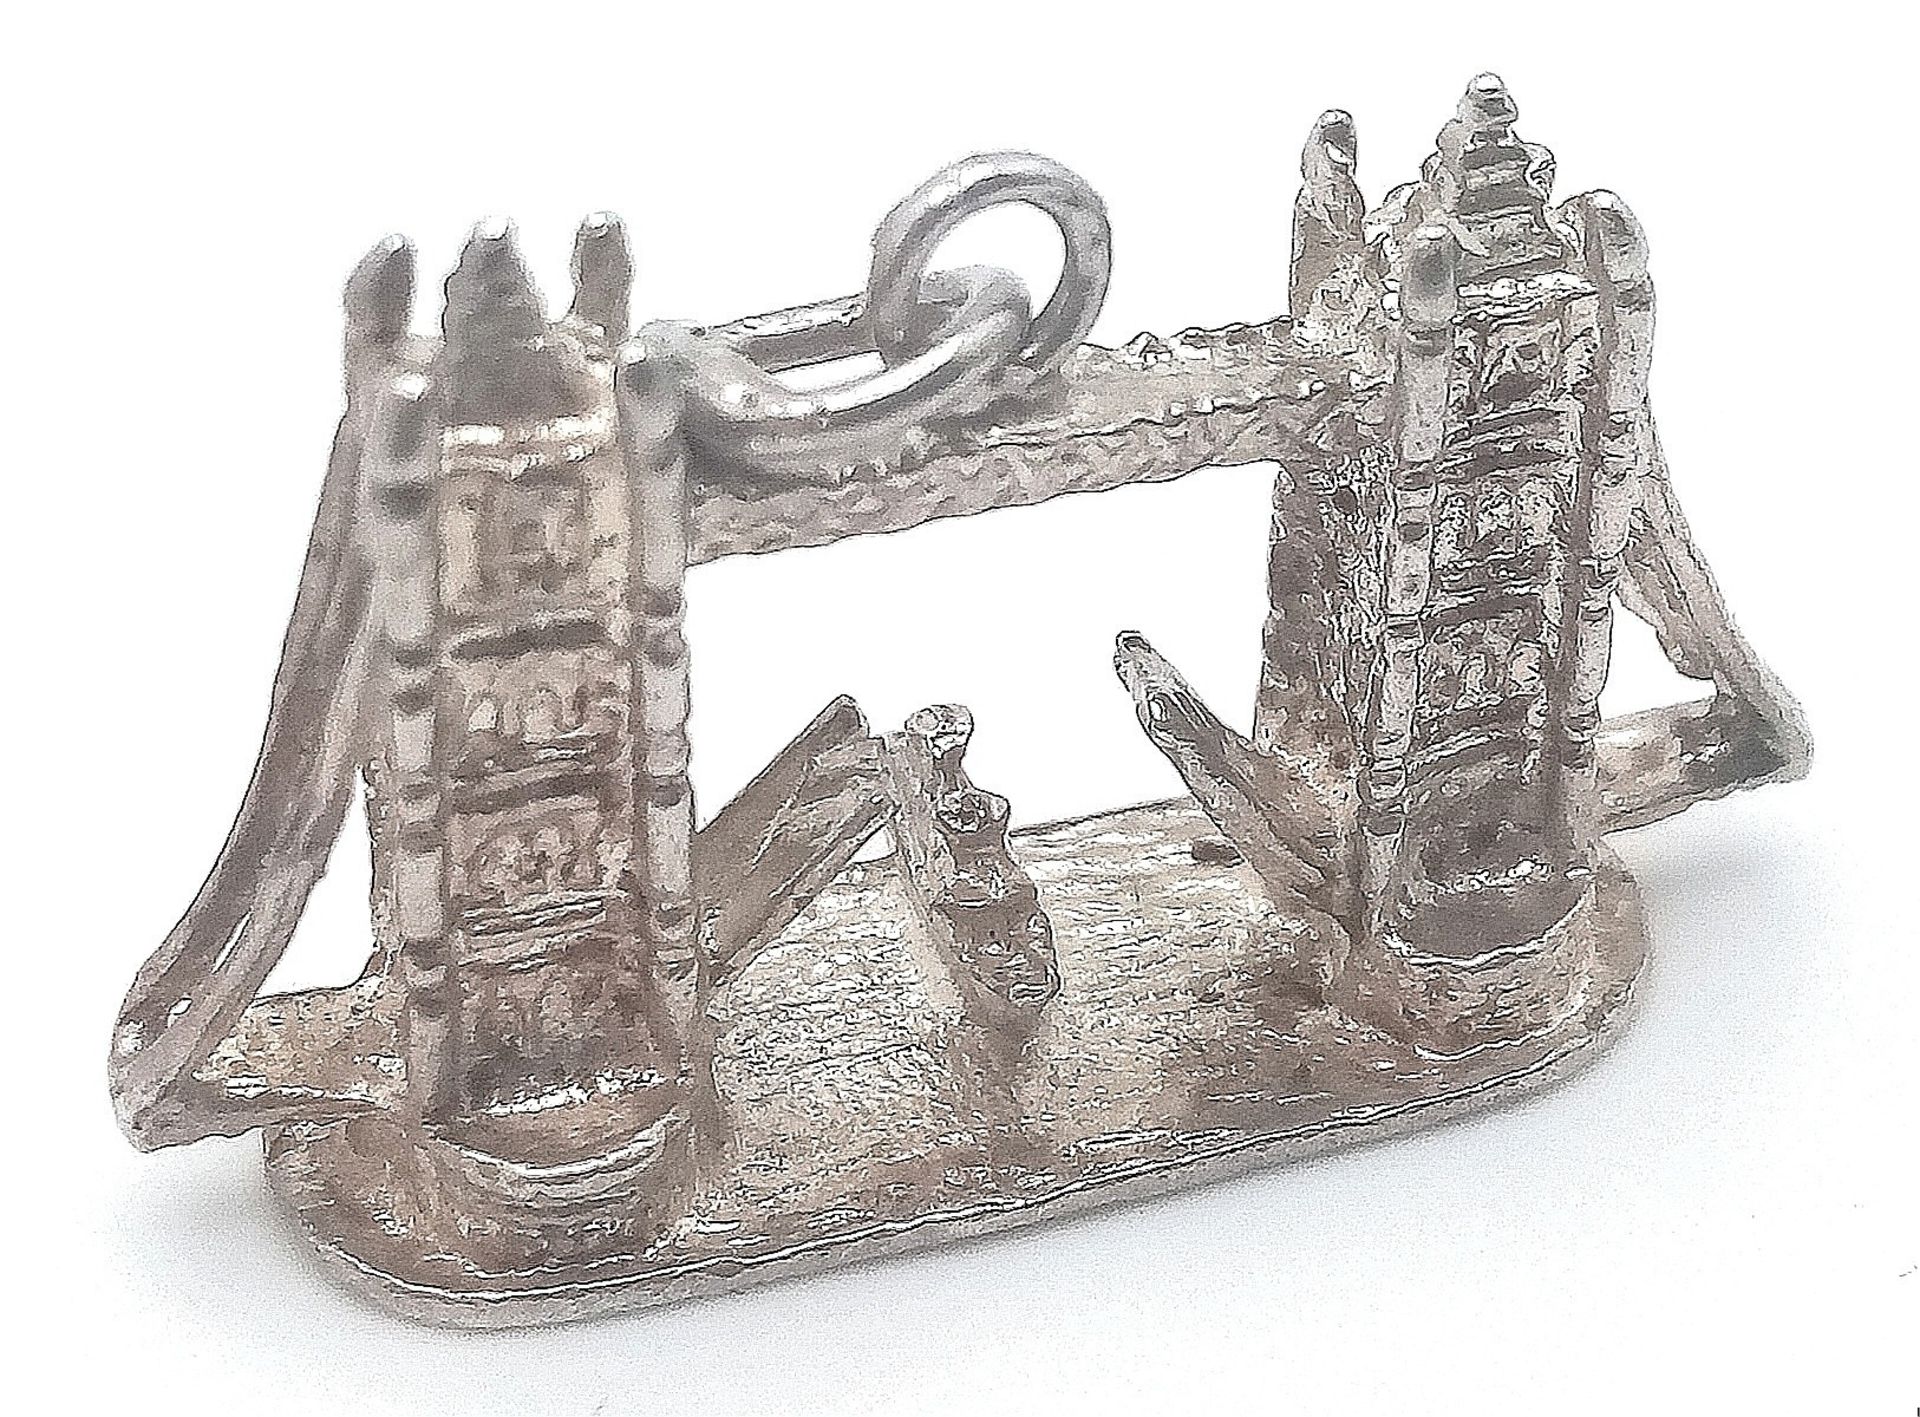 A STERLING SILVER LONDON THEMED TOWER BRIDGE CHARM/PENDANT. 3cm x 2.1cm, 6.5g weight. Ref: SC 8102